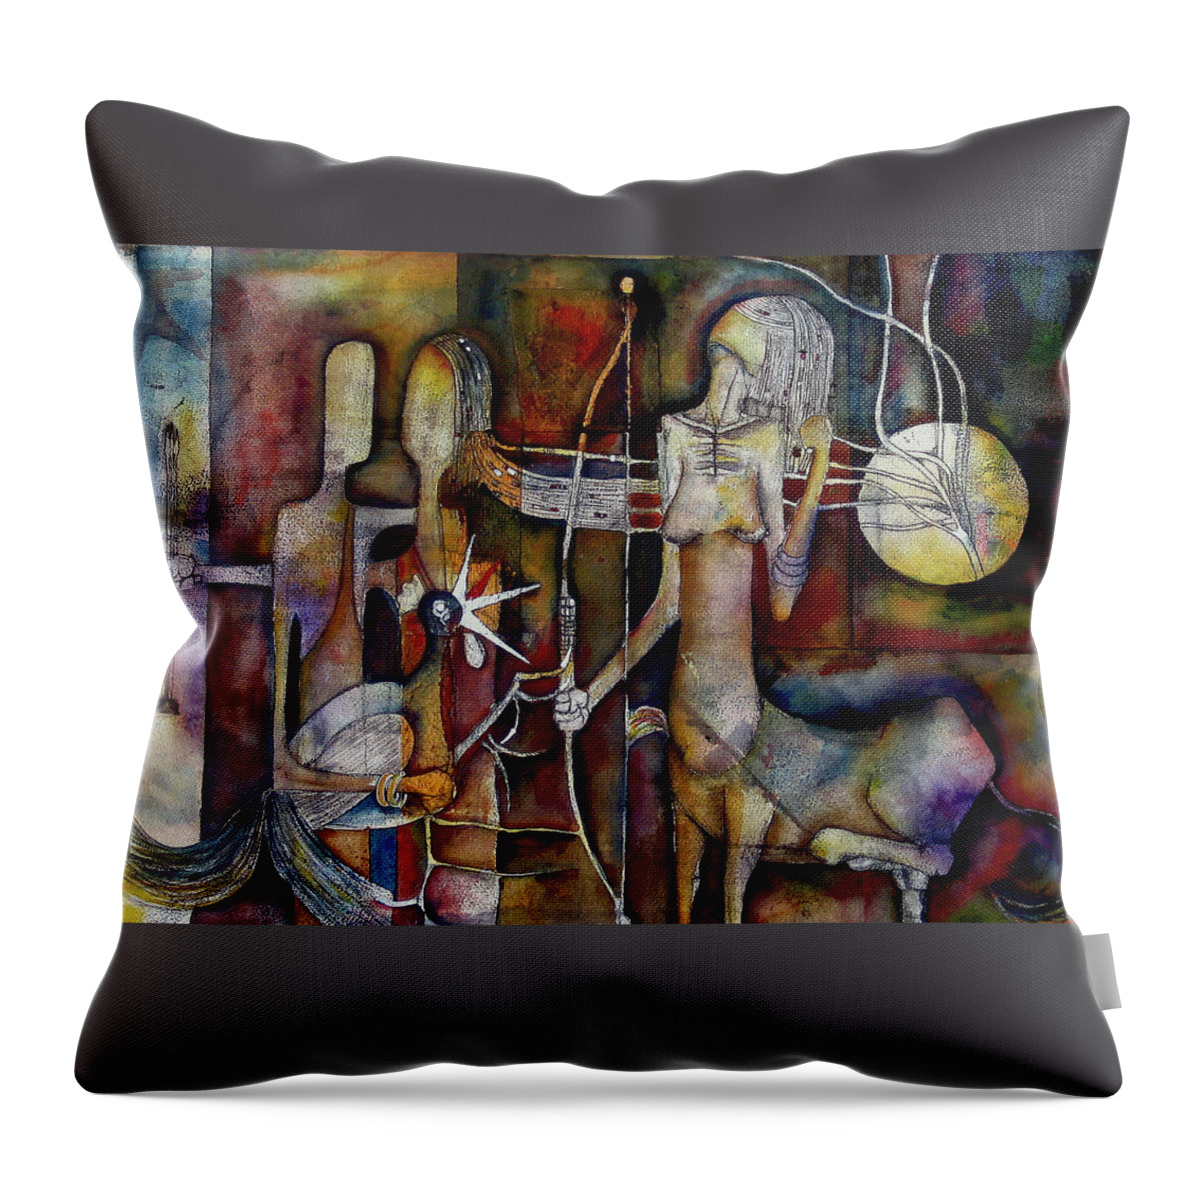 Abstract Throw Pillow featuring the painting The Unicorn Man by Speelman Mahlangu 1958-2004